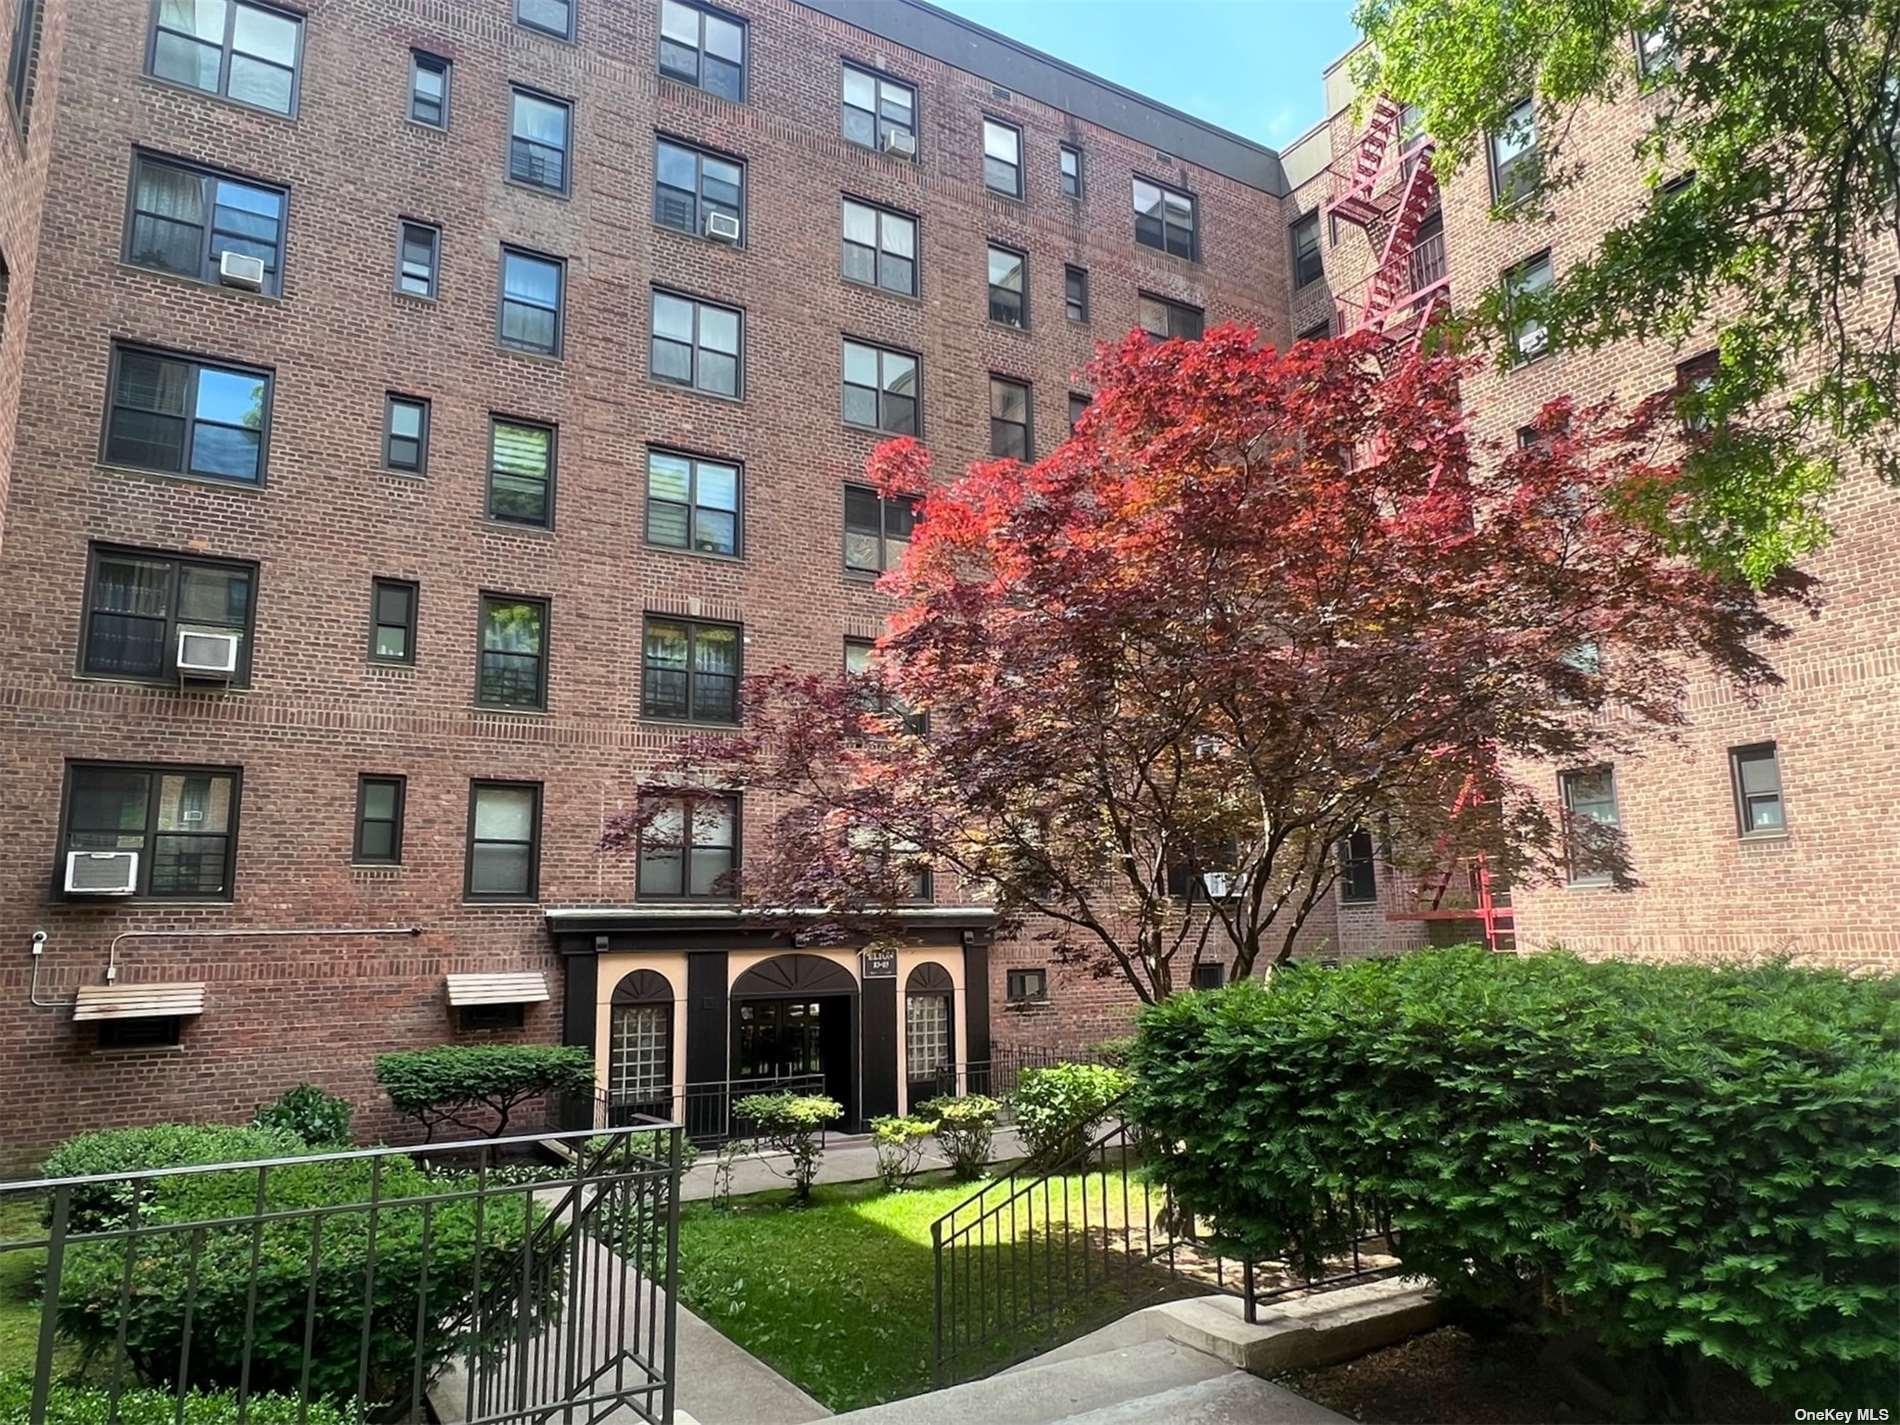 83-85 Woodhaven Boulevard #2E in Queens, Woodhaven, NY 11421